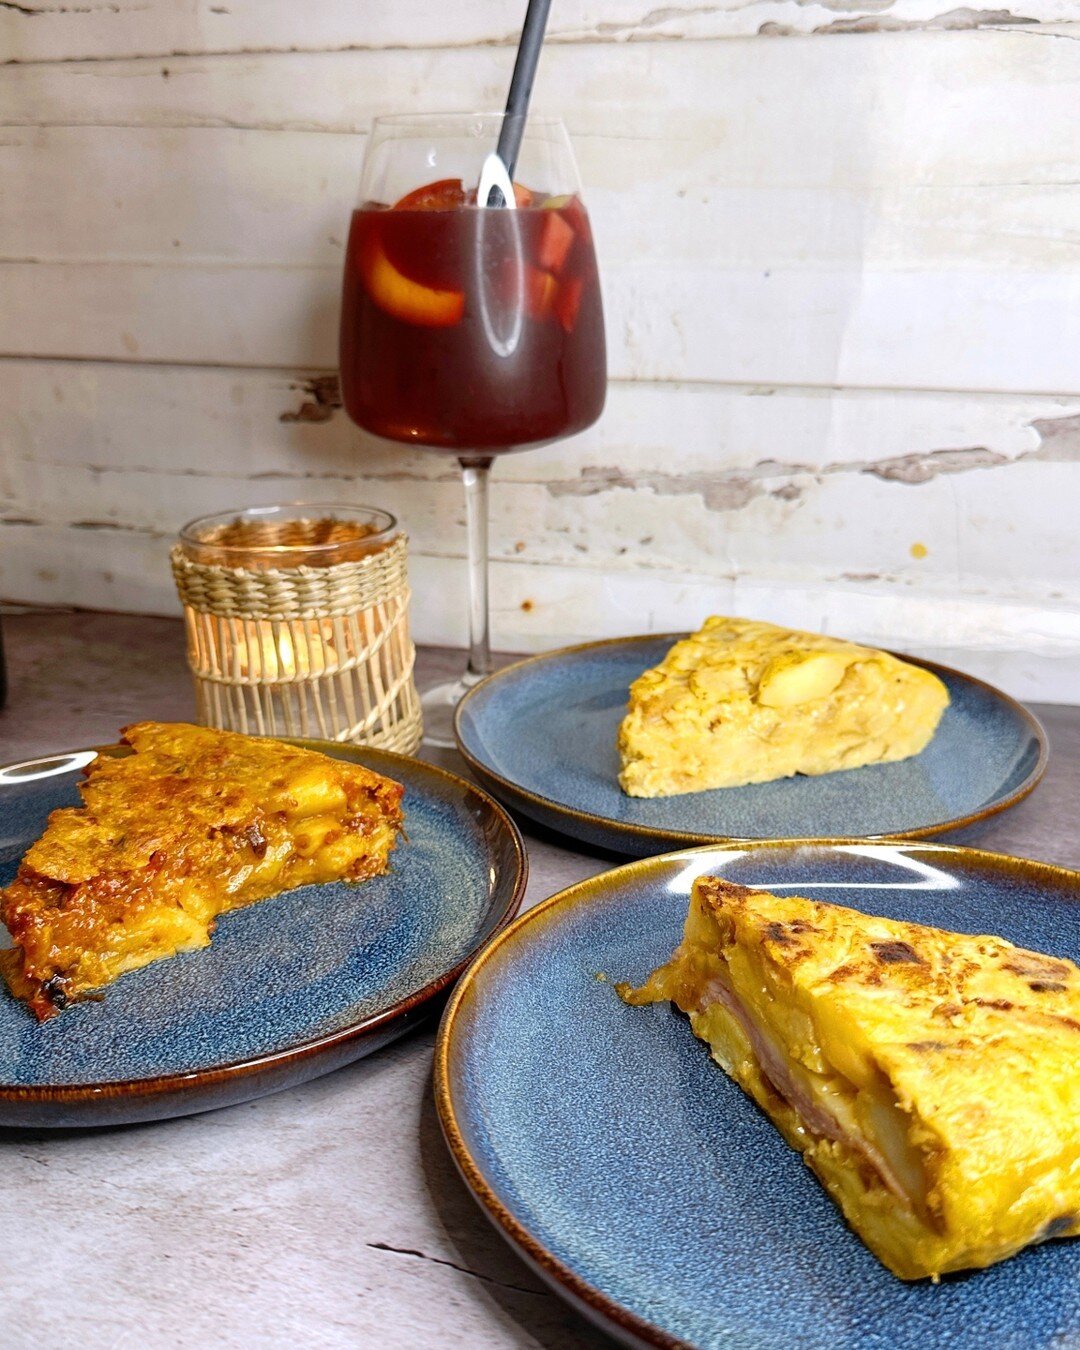 Nothing brings people together🥰 quite like good food, and at MrCroqueta, we take pride in crafting the most delicious and authentic Spanish dishes. But there's one dish that holds a special place in our hearts - our mouthwatering tortilla de patatas